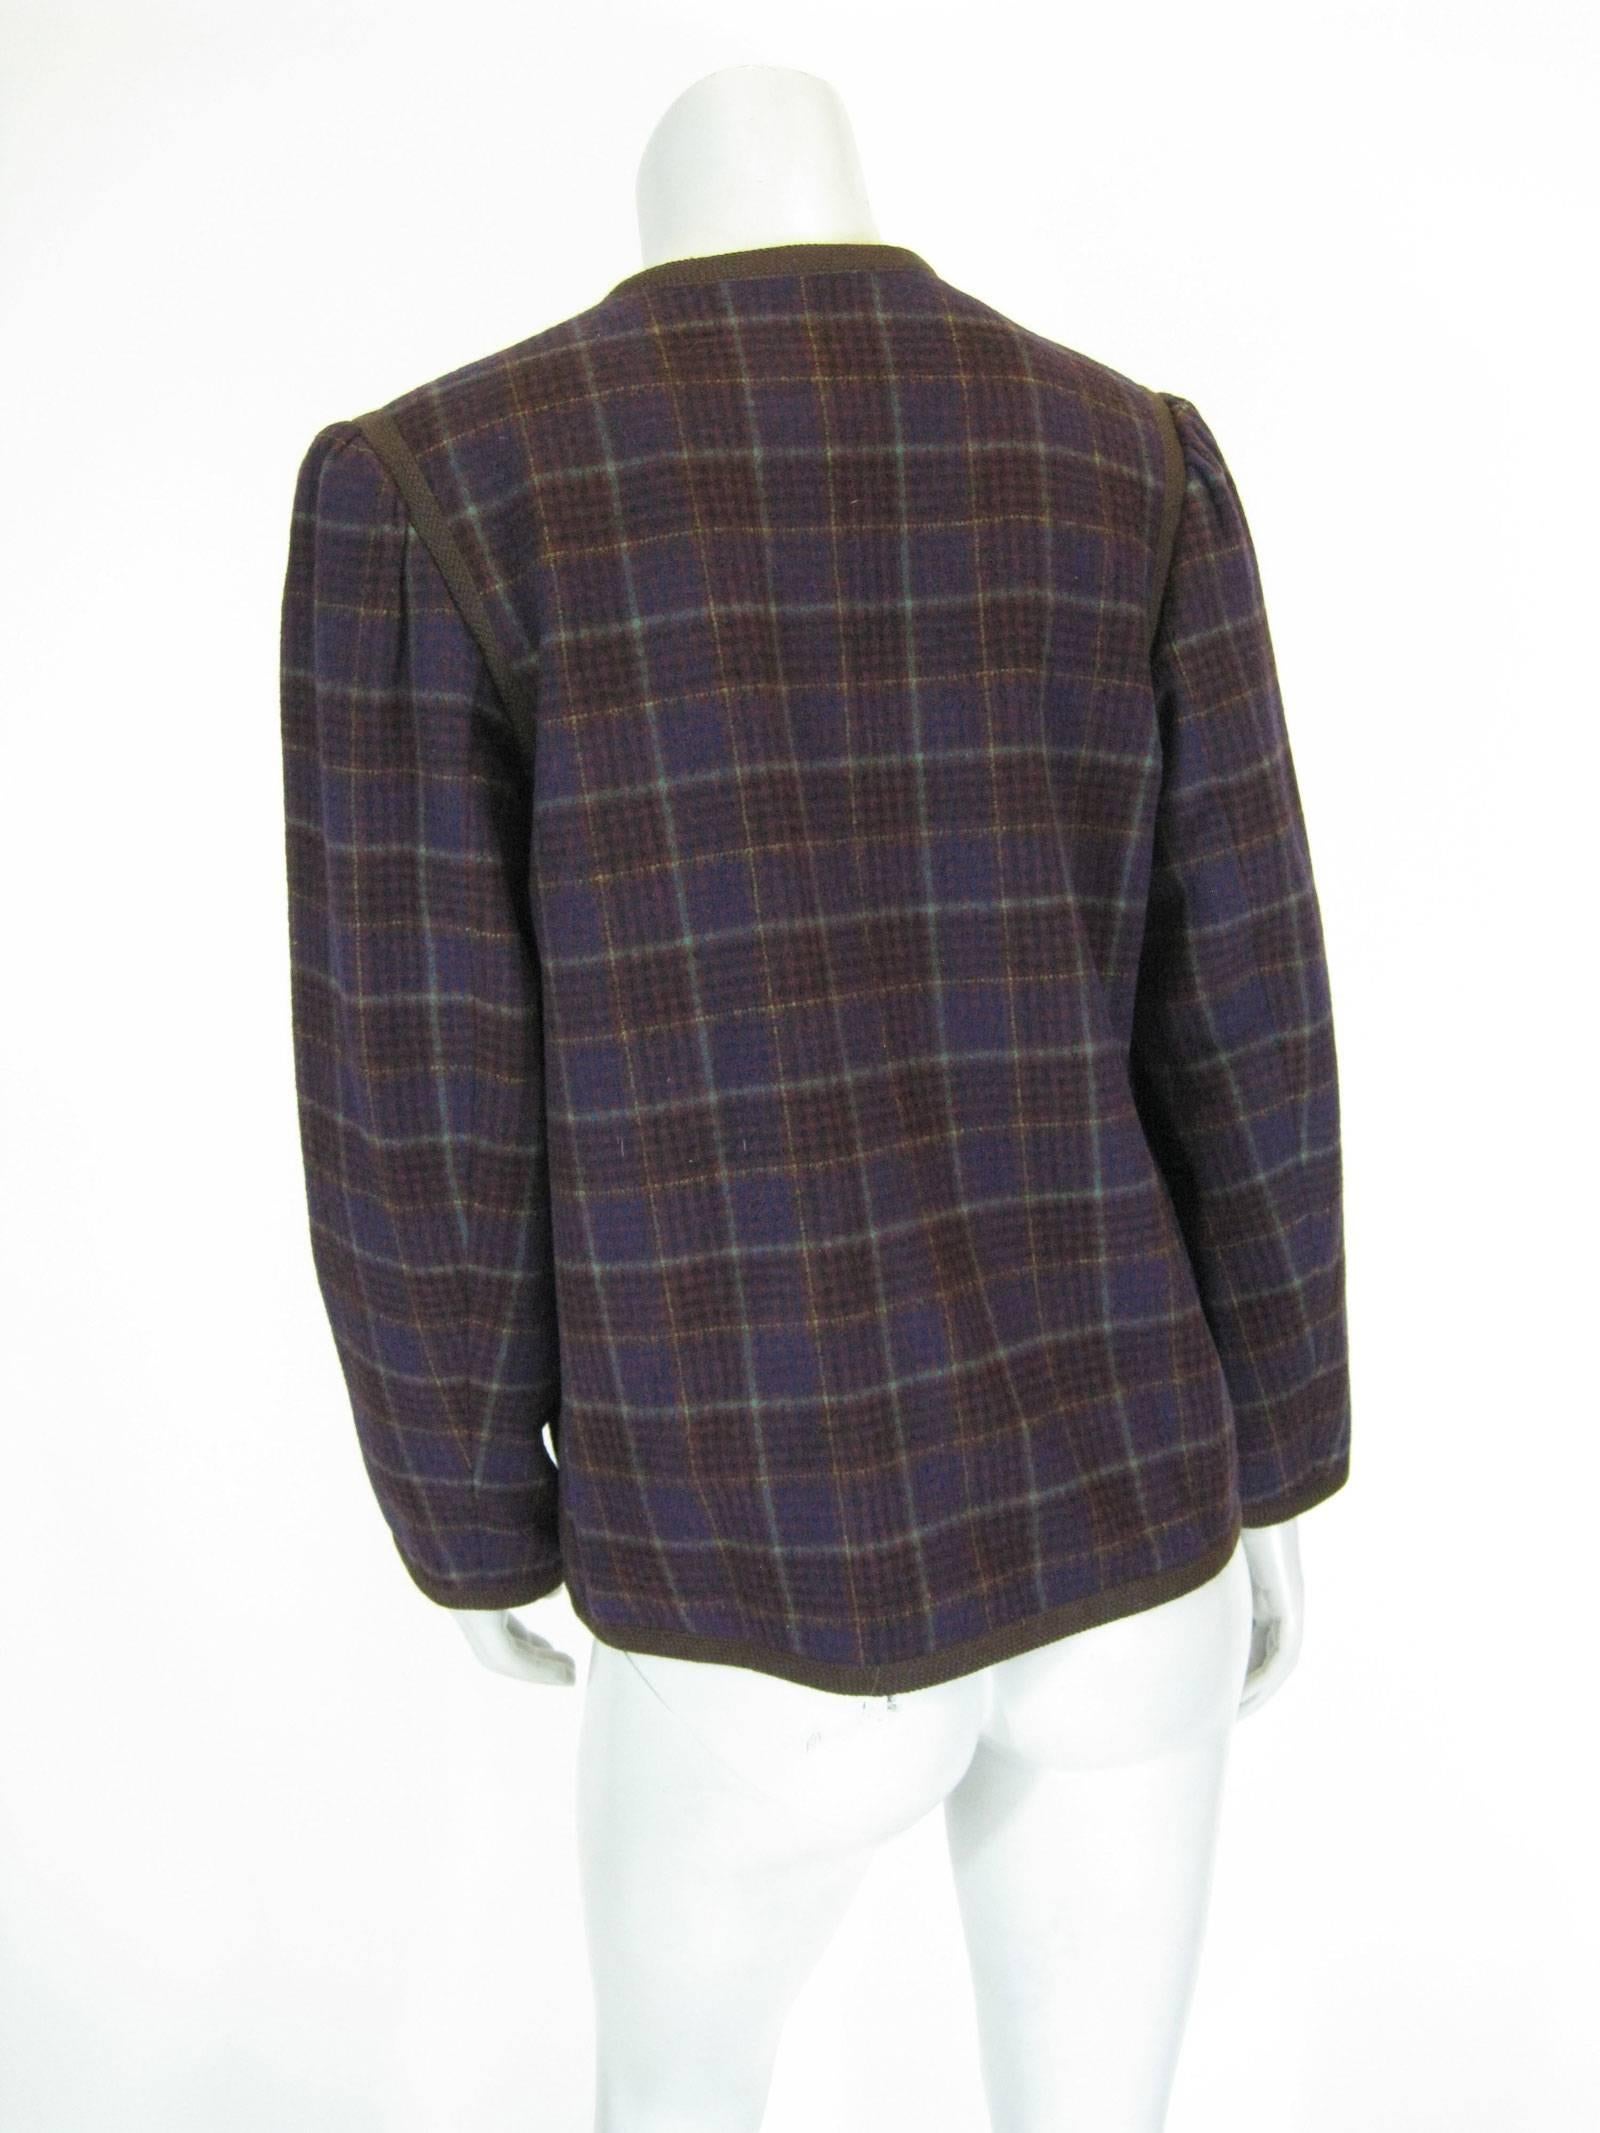 Yves Saint Laurent Give Gauche Plaid Wool Jacket In Excellent Condition In Oakland, CA